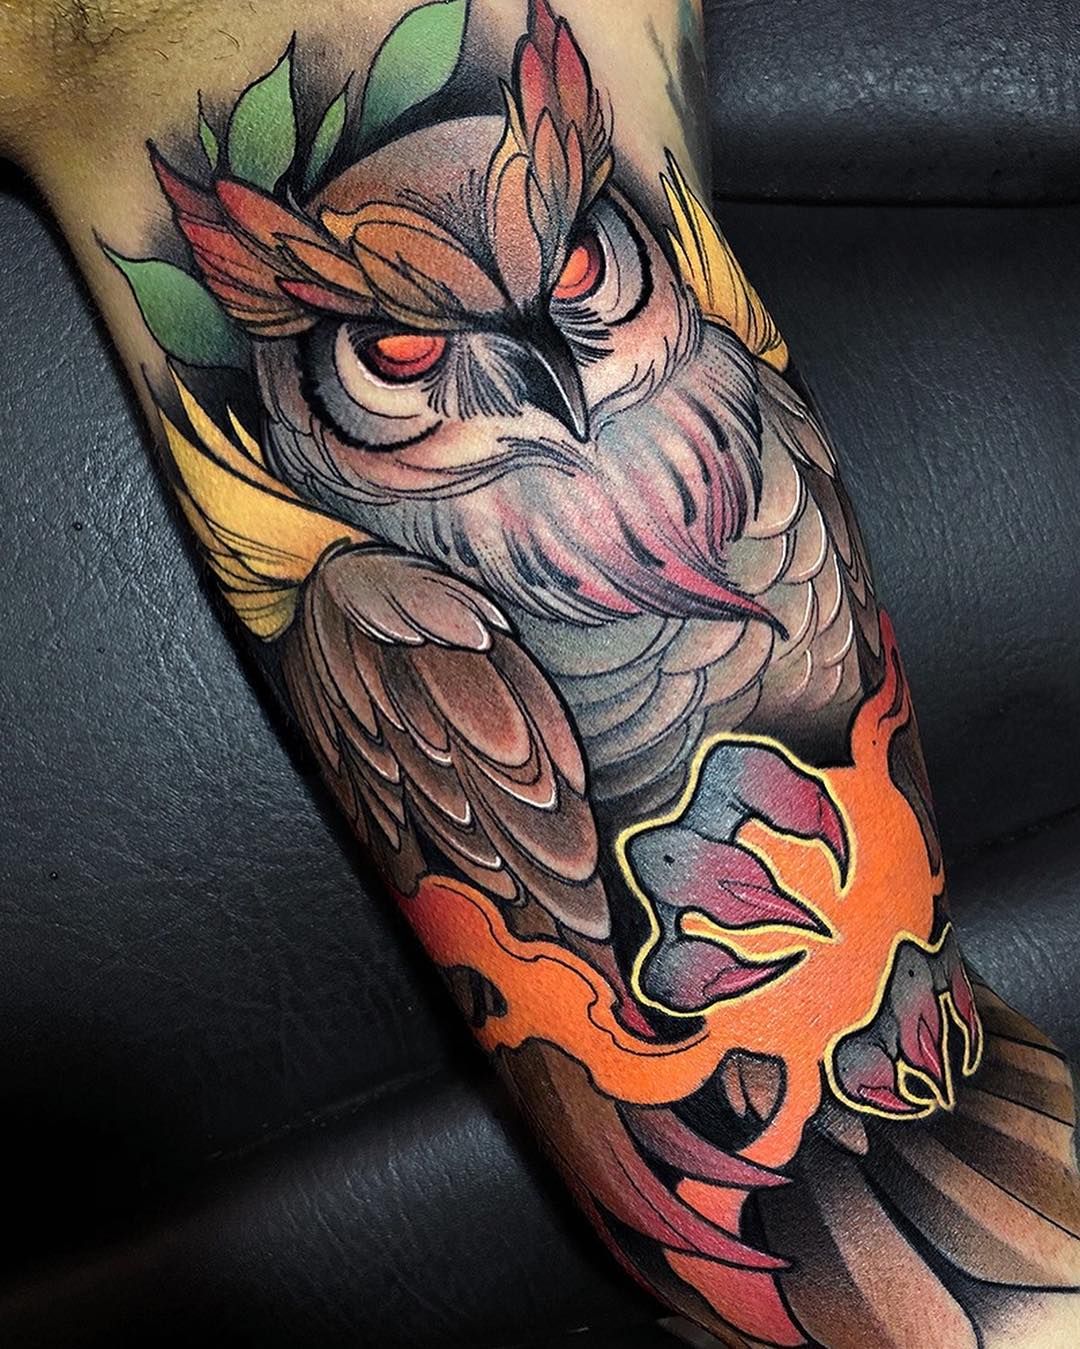 Owl with Crescent moon and hourglass 1 session in by Brian Chambers   Reno Tattoo Company Reno NV  Tattoos Hourglass tattoo Japanese sleeve  tattoos